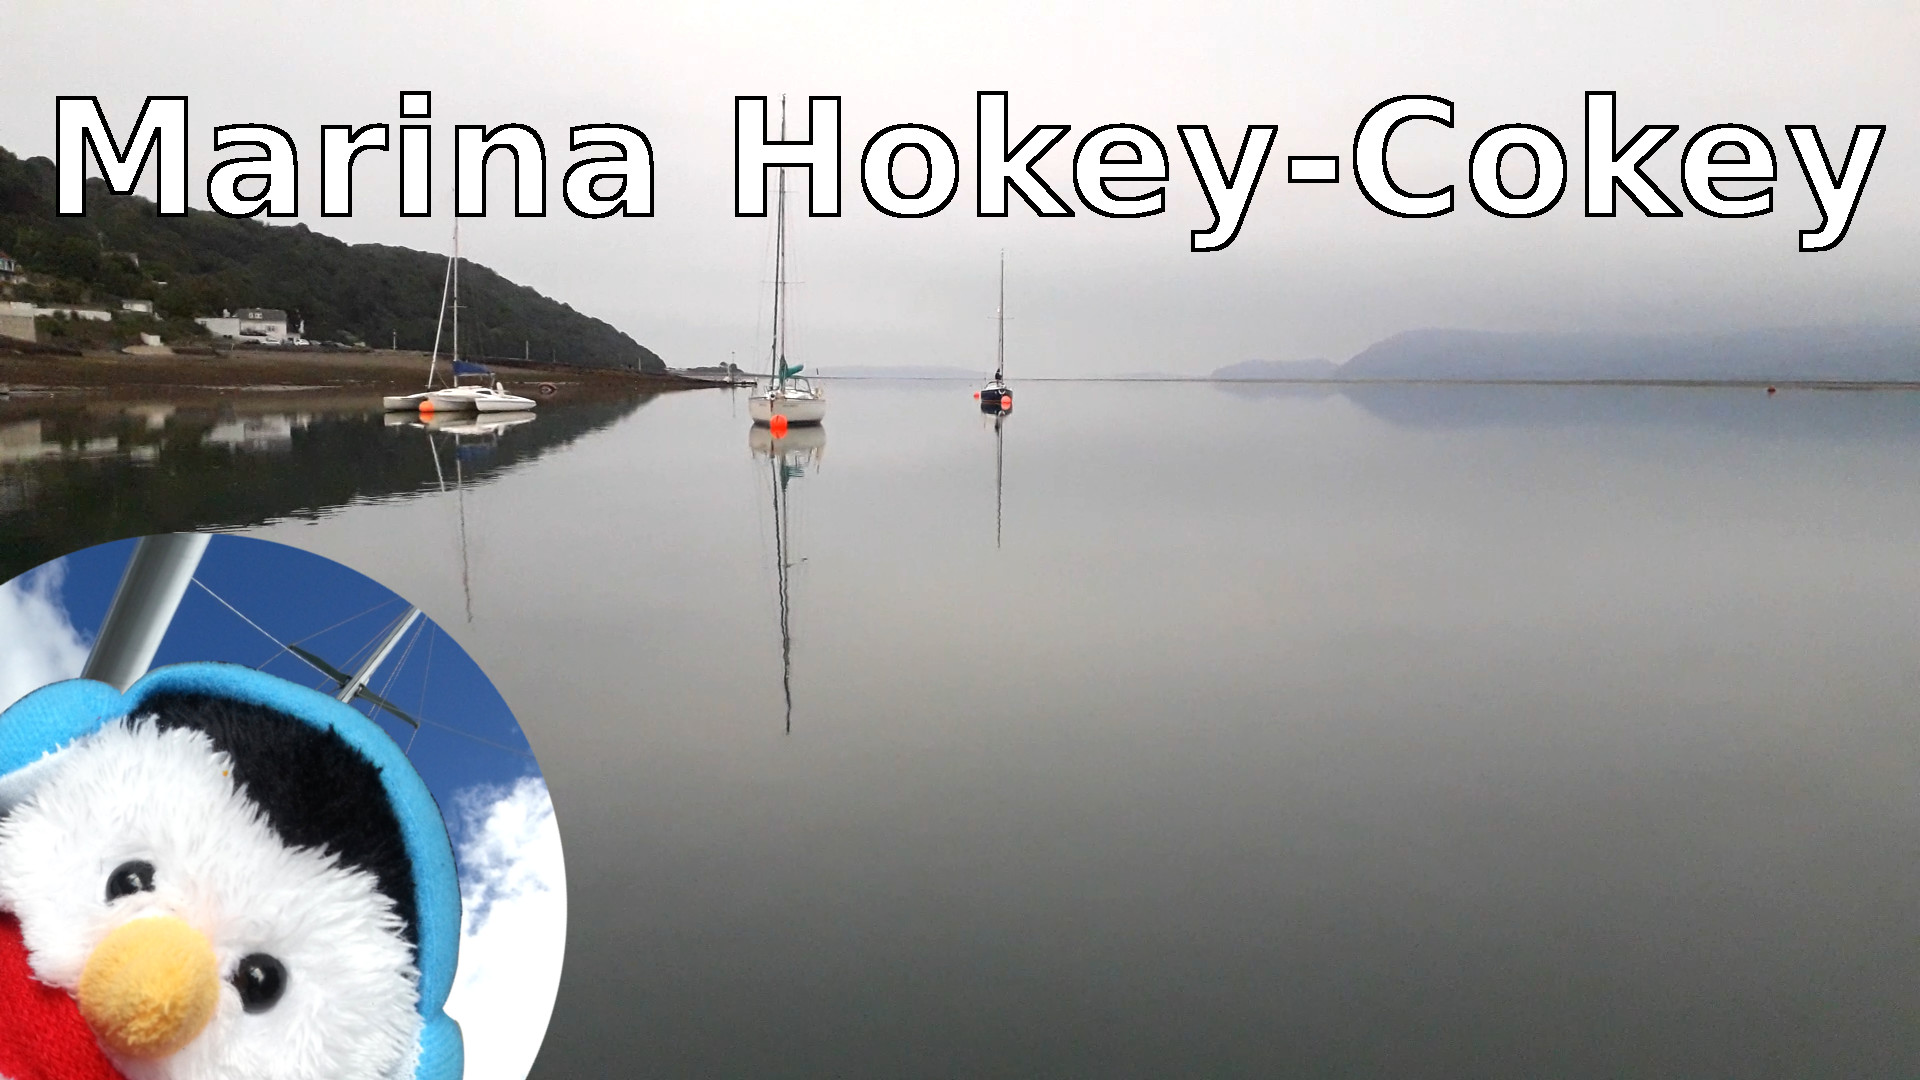 Watch our "Marina Hokey Cokey" video and add comments